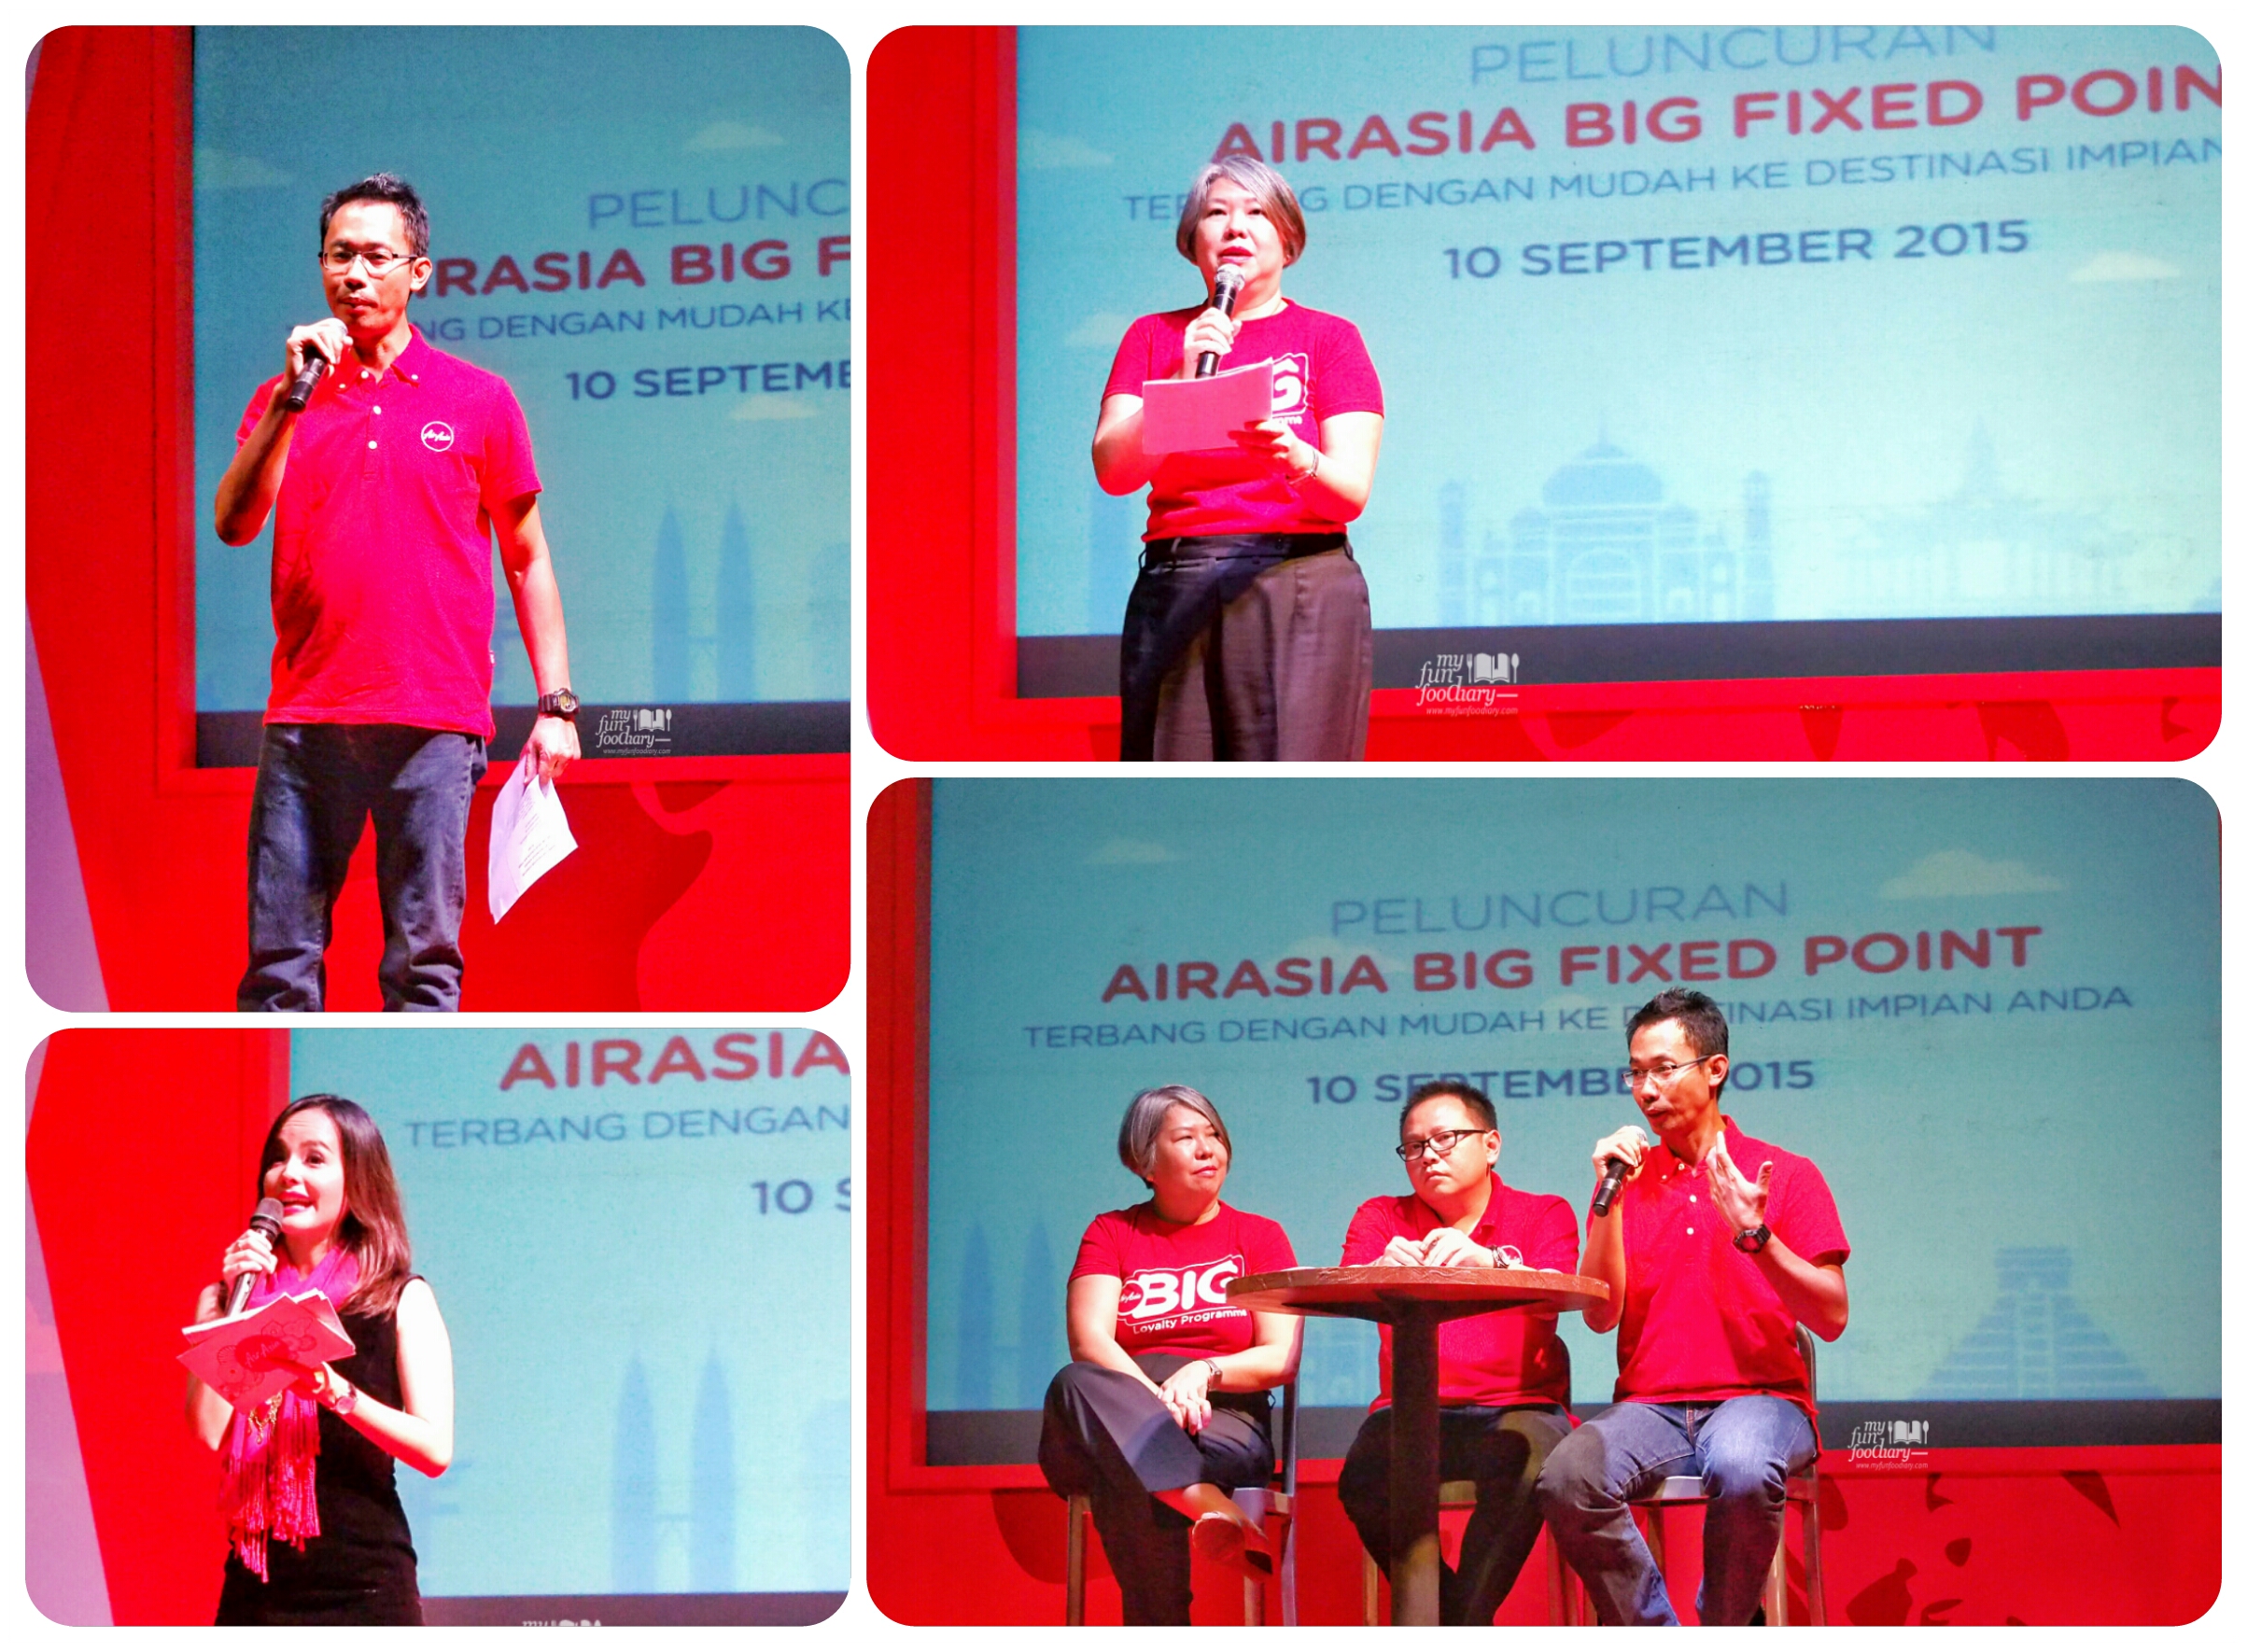 Speakers from AirAsia CEO at Level II AirAsia Event Big Fixed Point by Myfunfoodiary